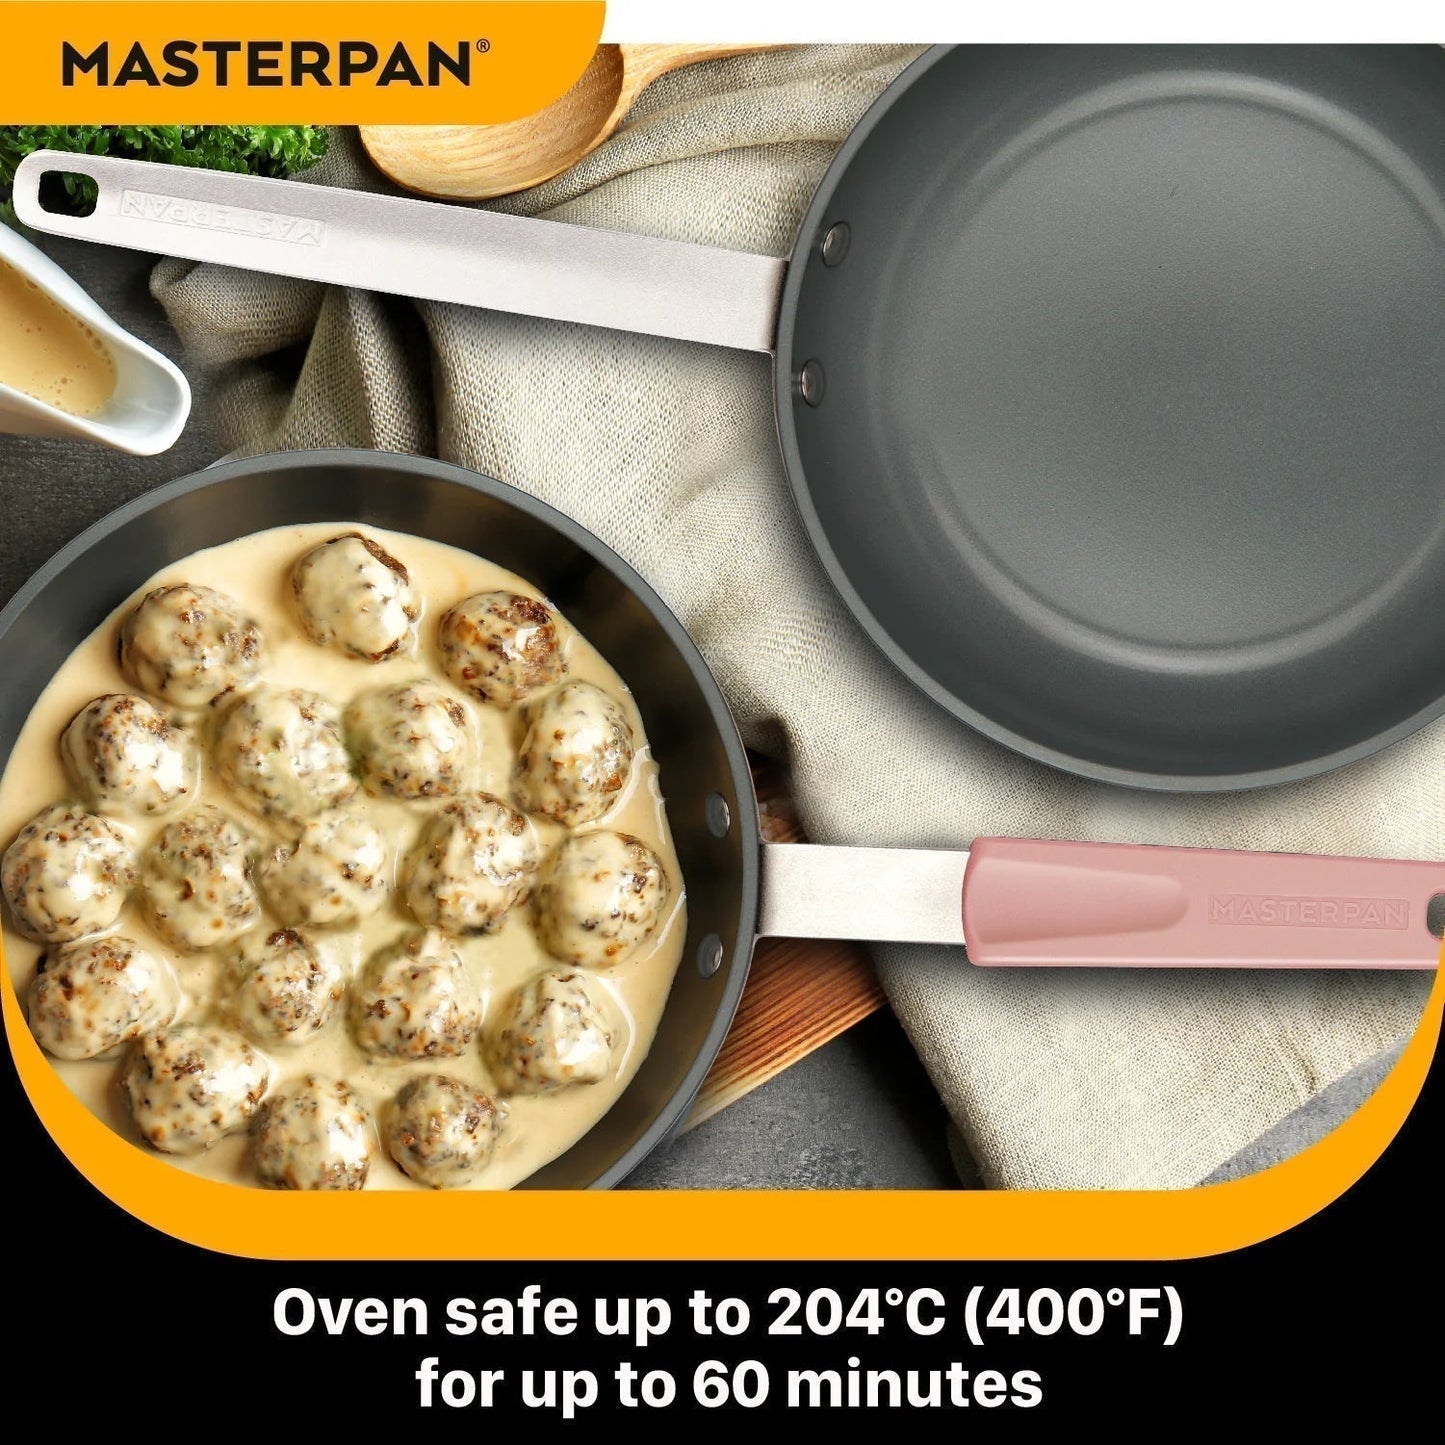 MASTERPAN Chef's Series 10” Clay Stovetop Oven Fry Pan & Skillet With Heat-in Steam-Out Lid, Healthy Ceramic Non-stick Aluminium With Stainless Steel Chef’s Handle, 2 Utensils and Felt Pan Protector